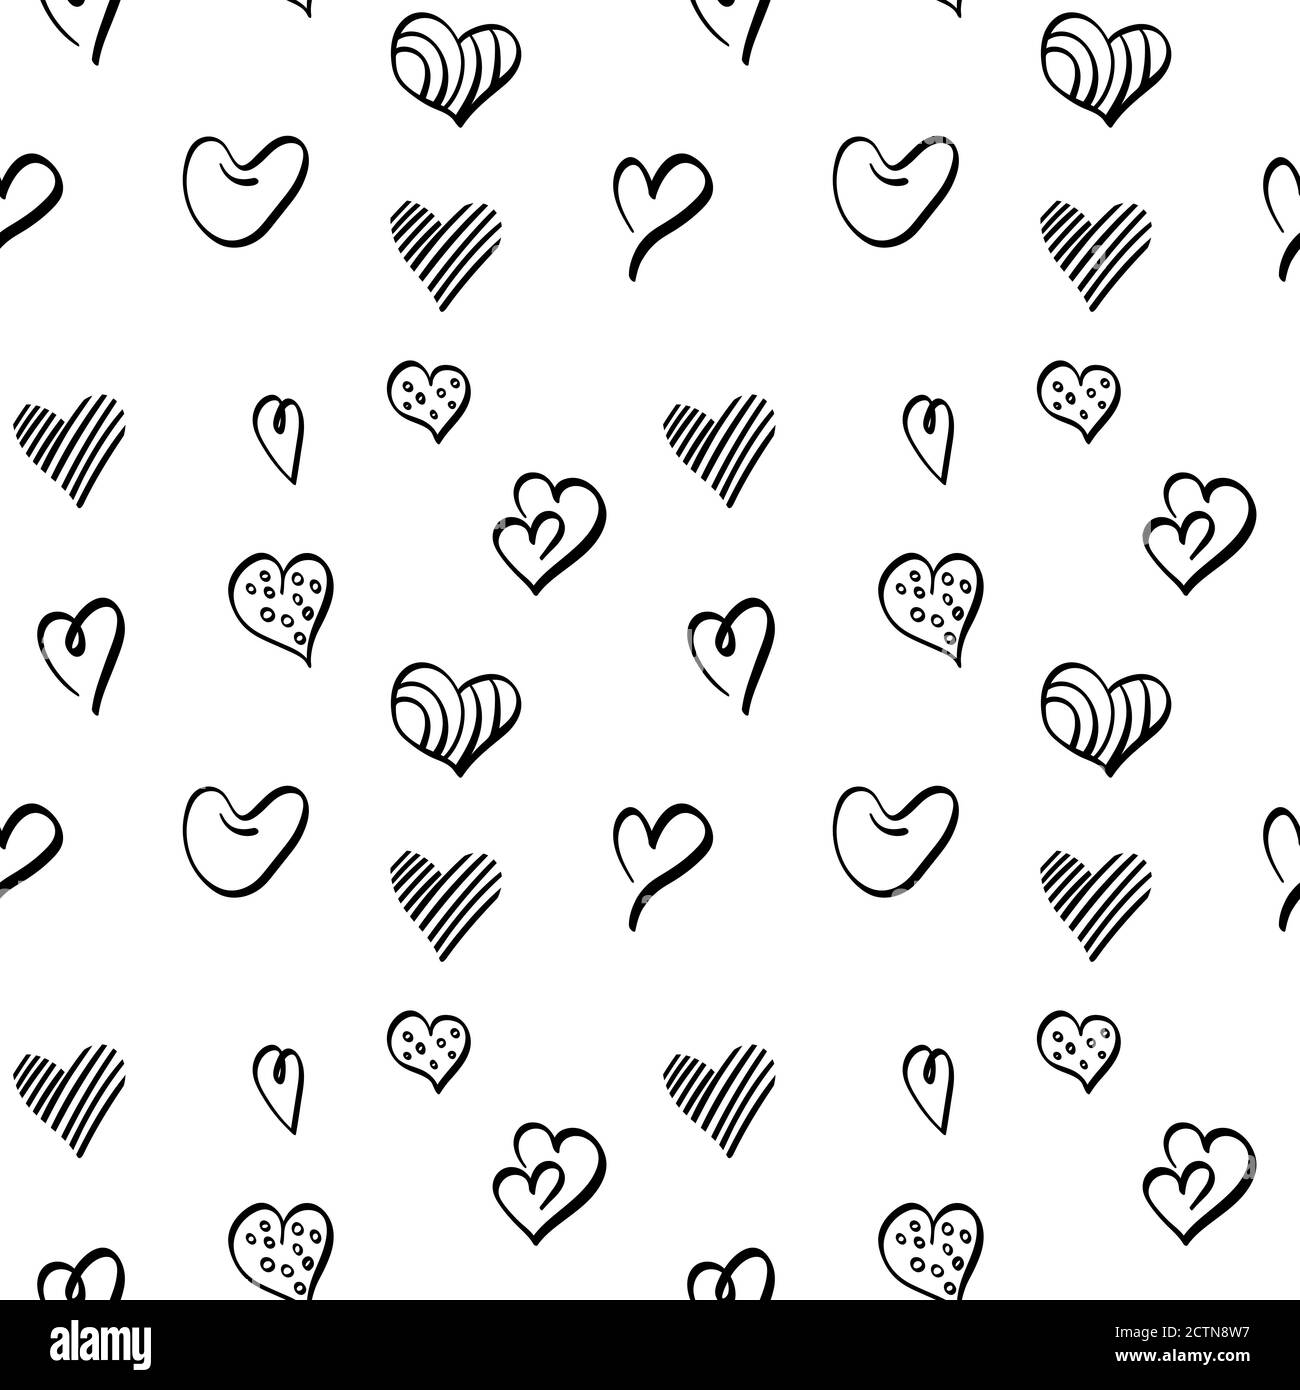 Heart shapes seamless pattern. Black and white doodle print for ...